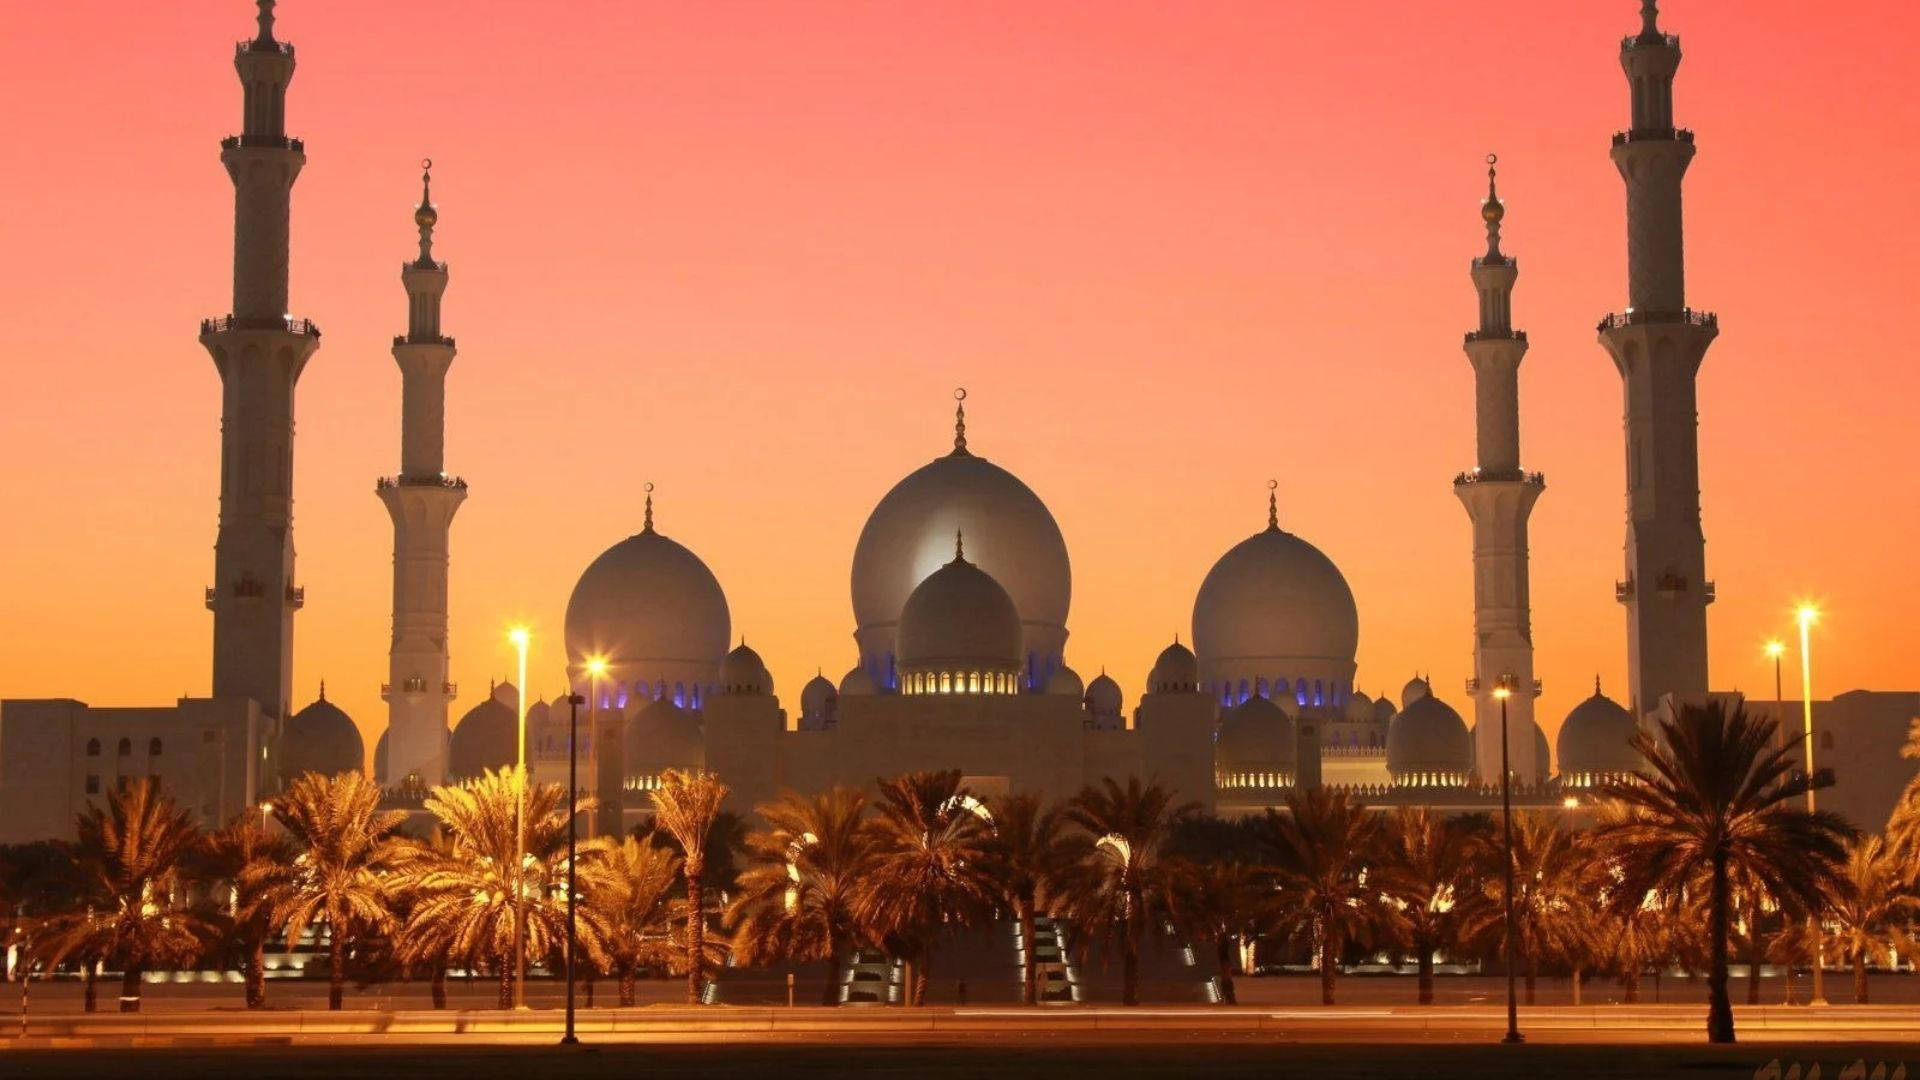 Baghdad Mosque At Sunset